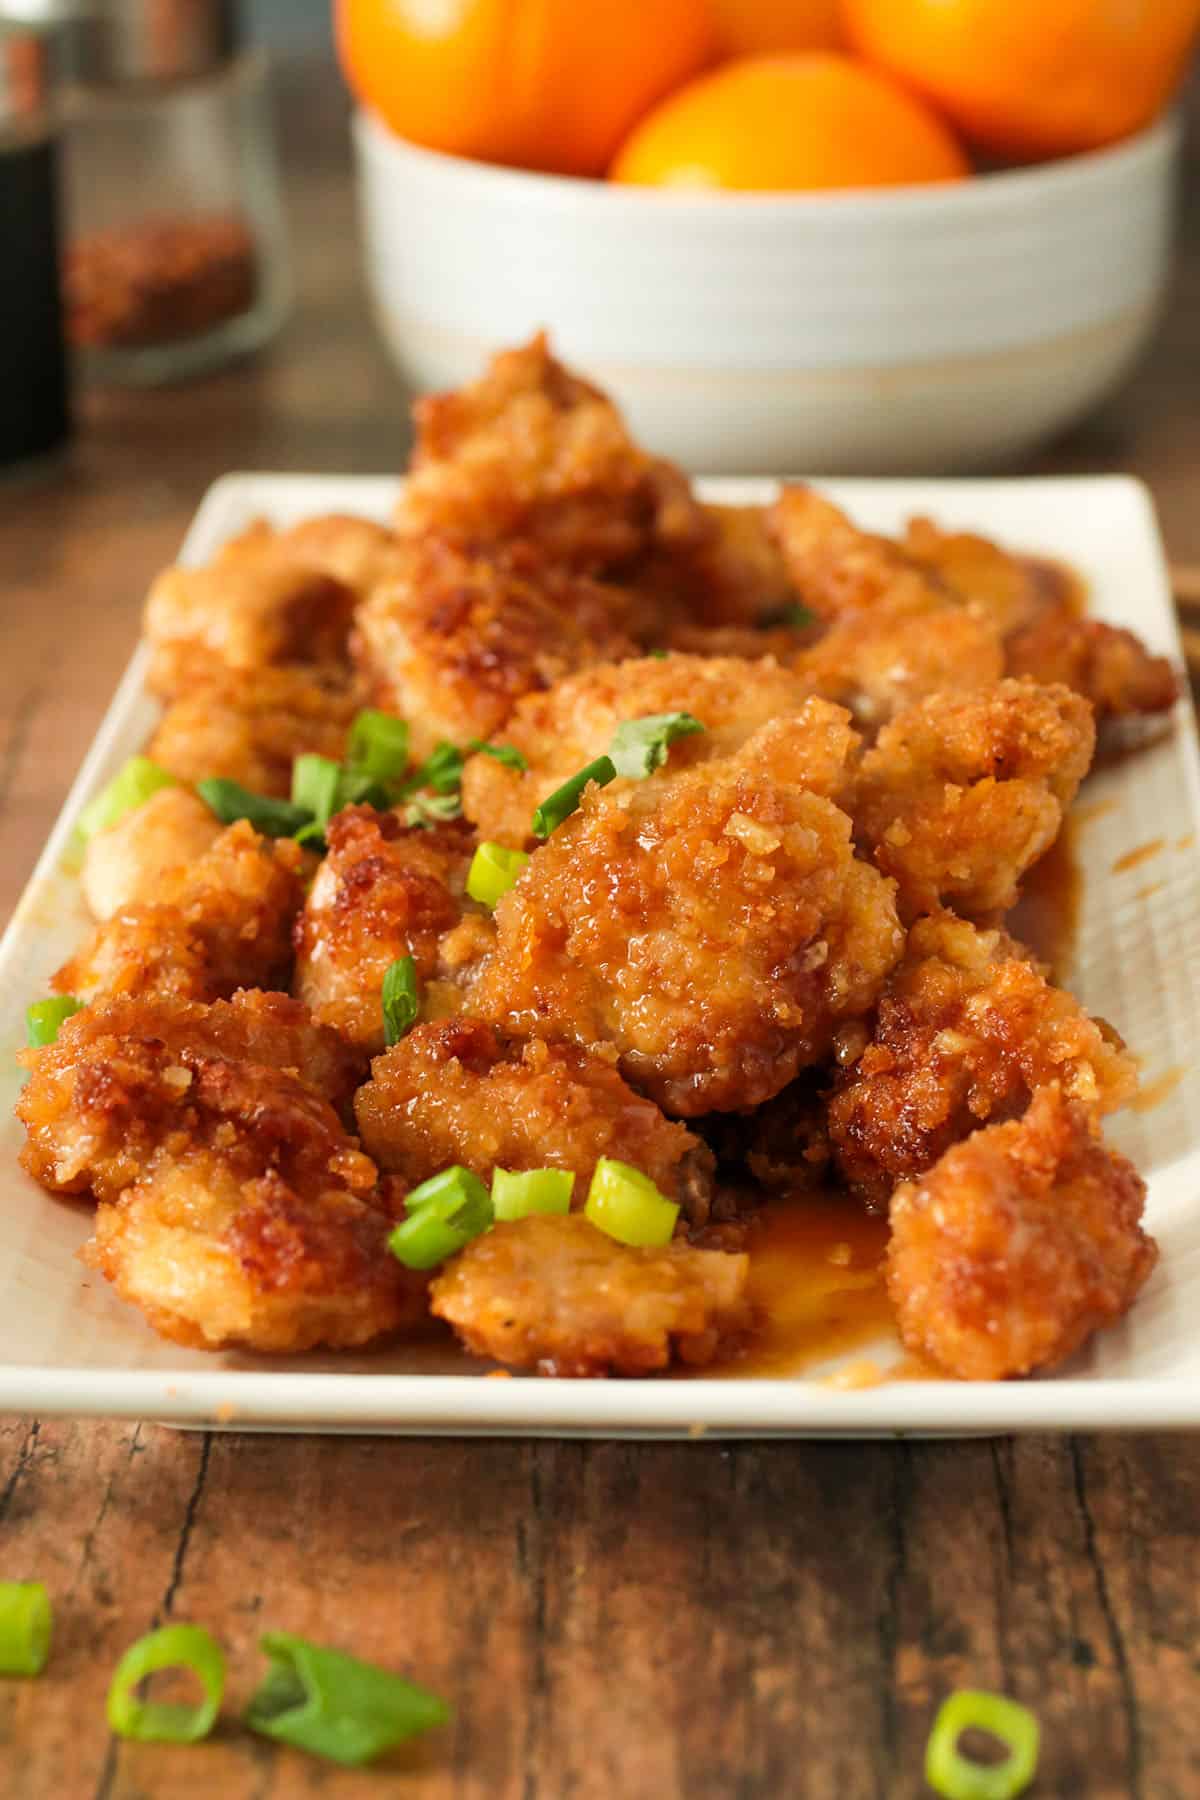 The orange chicken served in a platter and garnished with green onions.